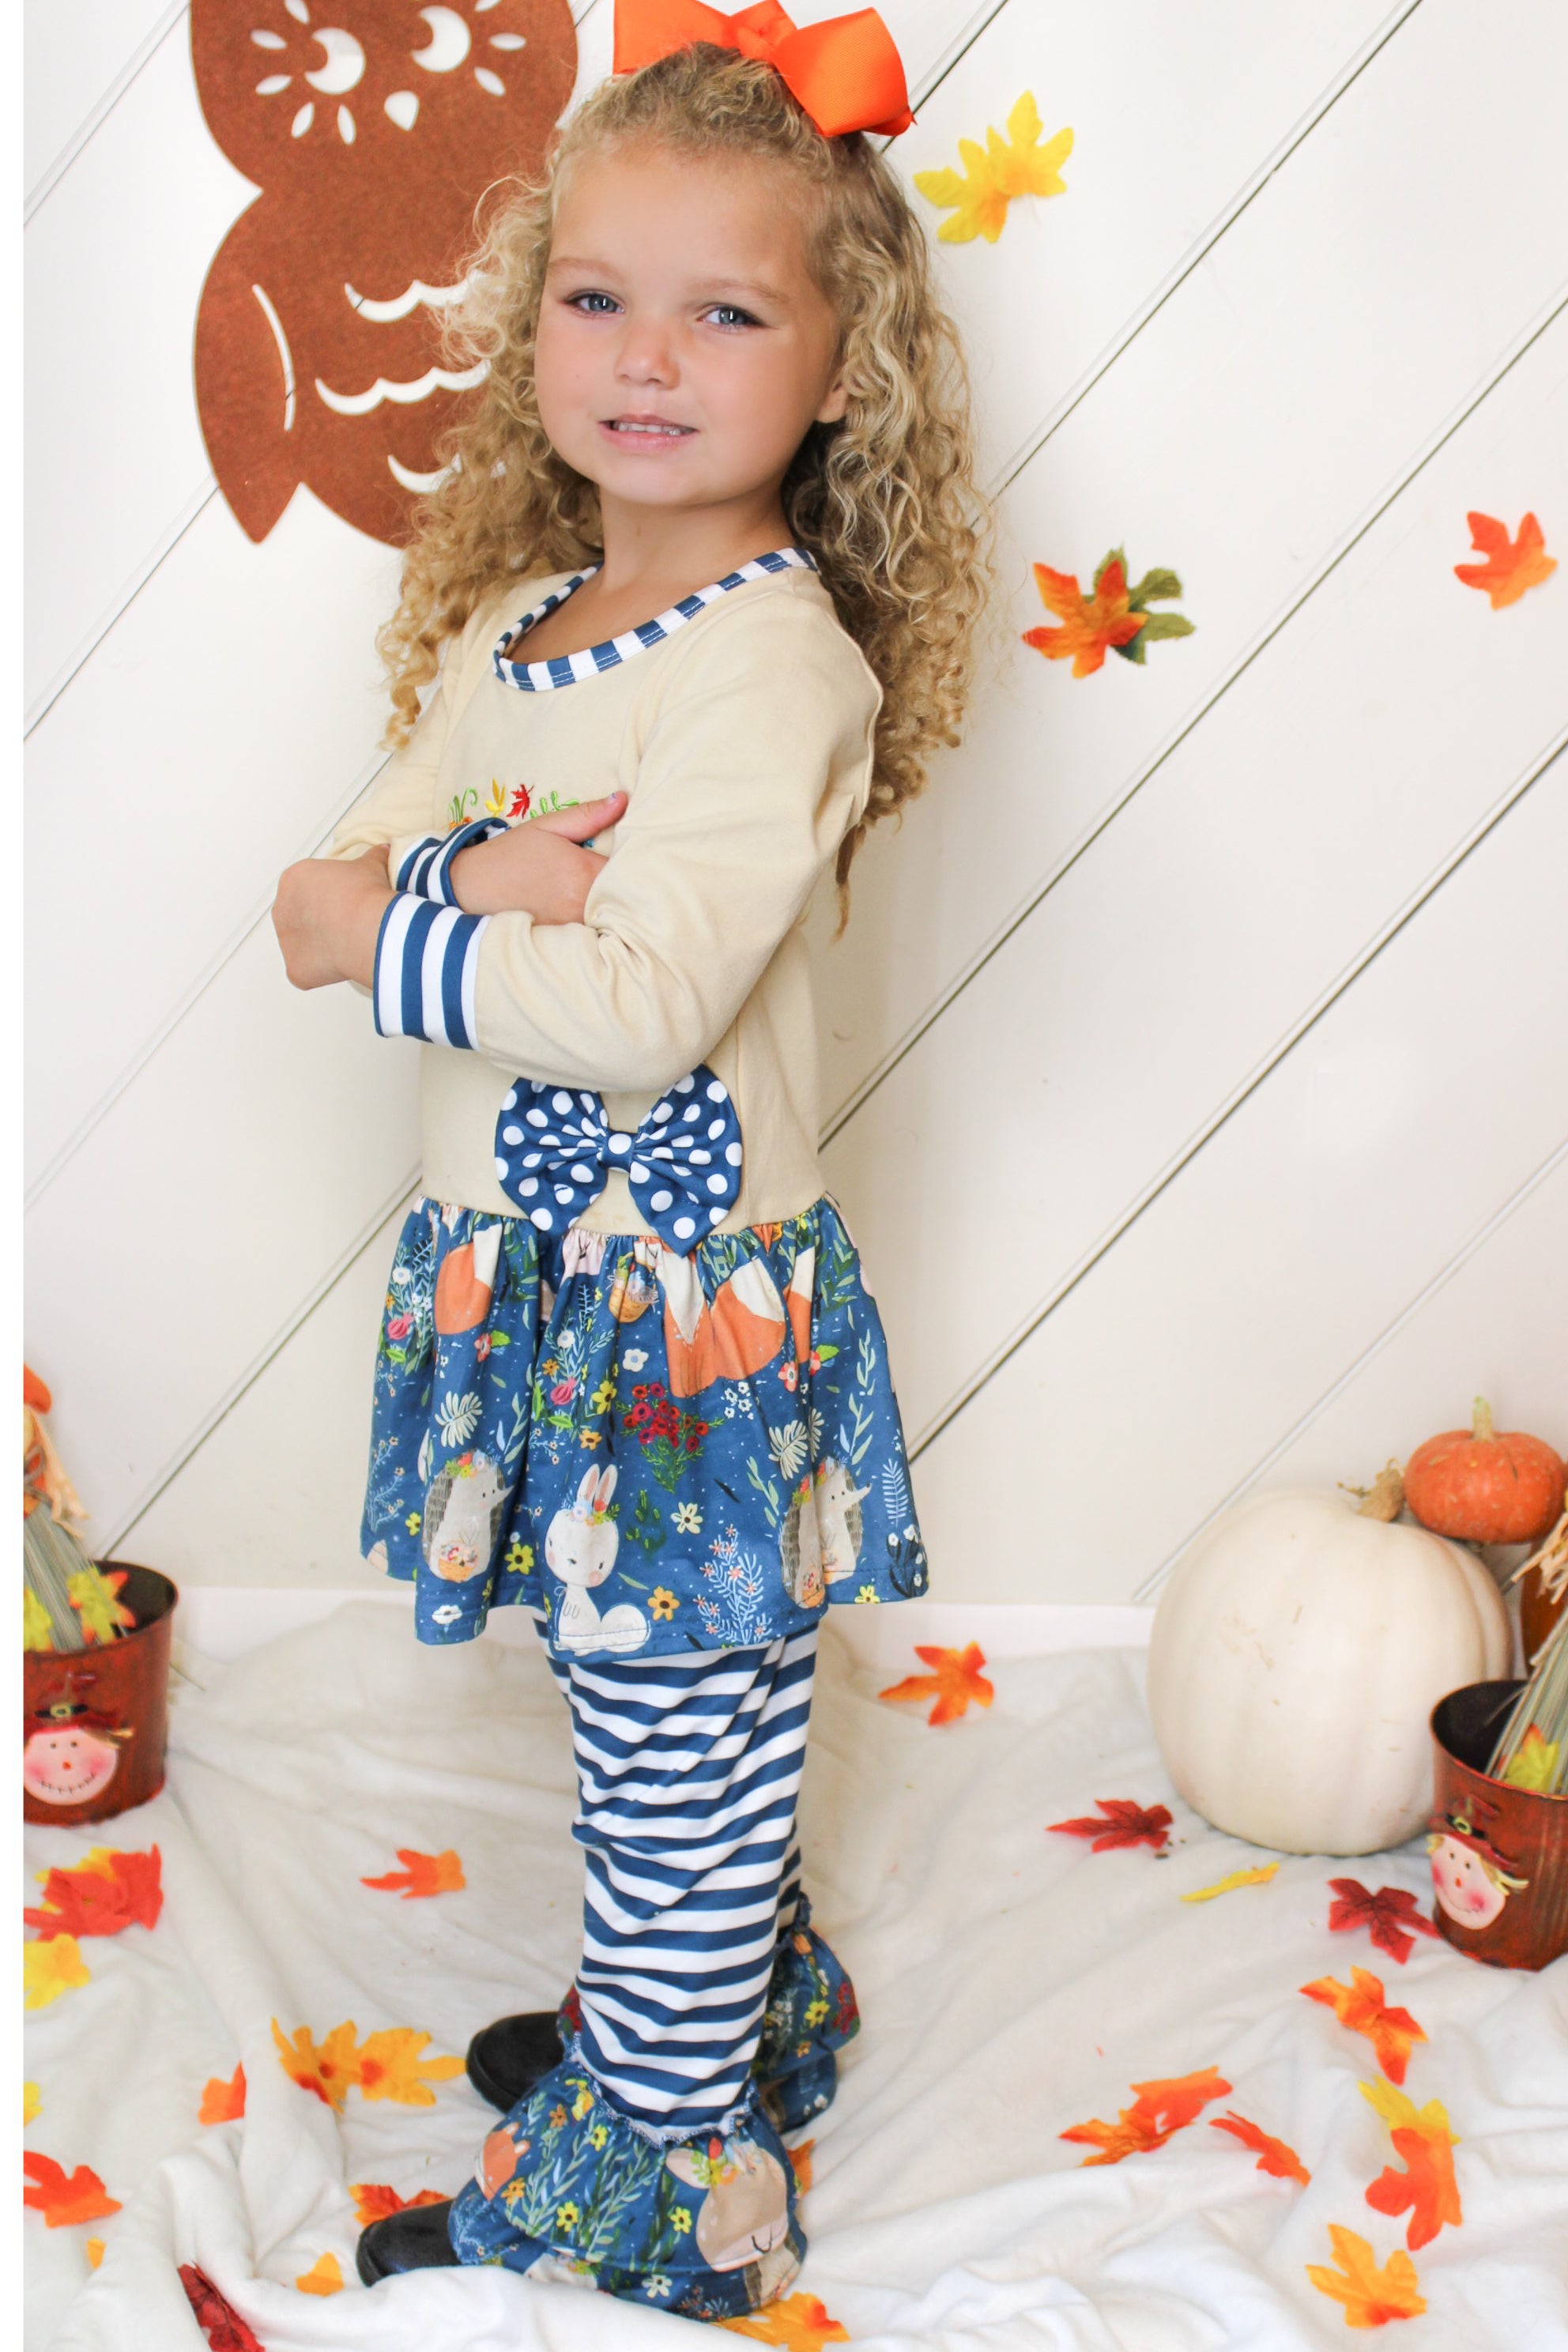 Baby Toddler Little Give Thanks Skirted Dress & Pants Outfit Set - Angeline Kids